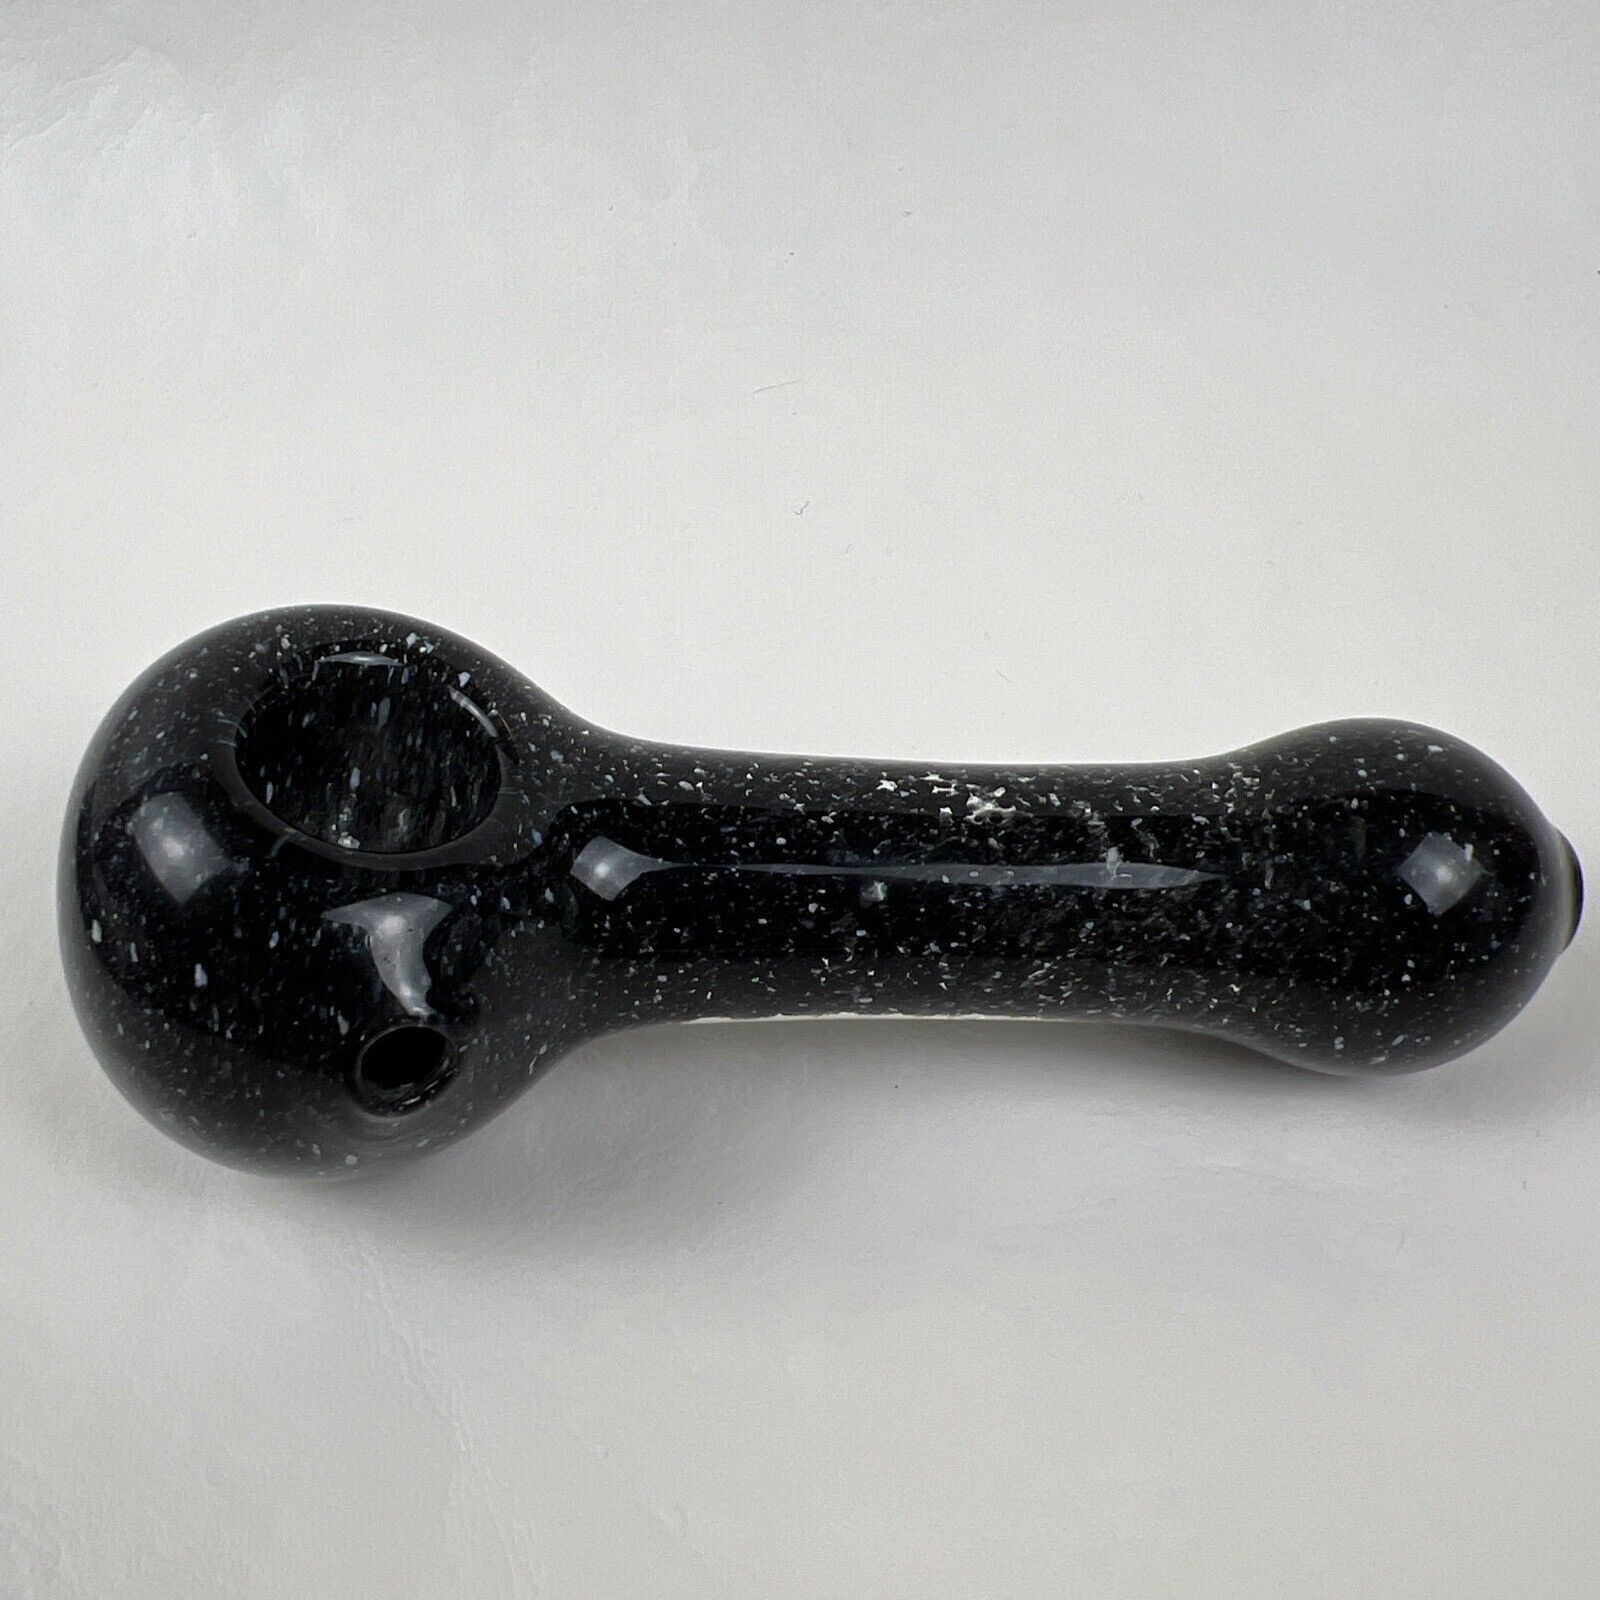 4.75 Black Speckled Thick Glass Tobacco Smoking Pipe Handmade Tobacco Herb Pipe